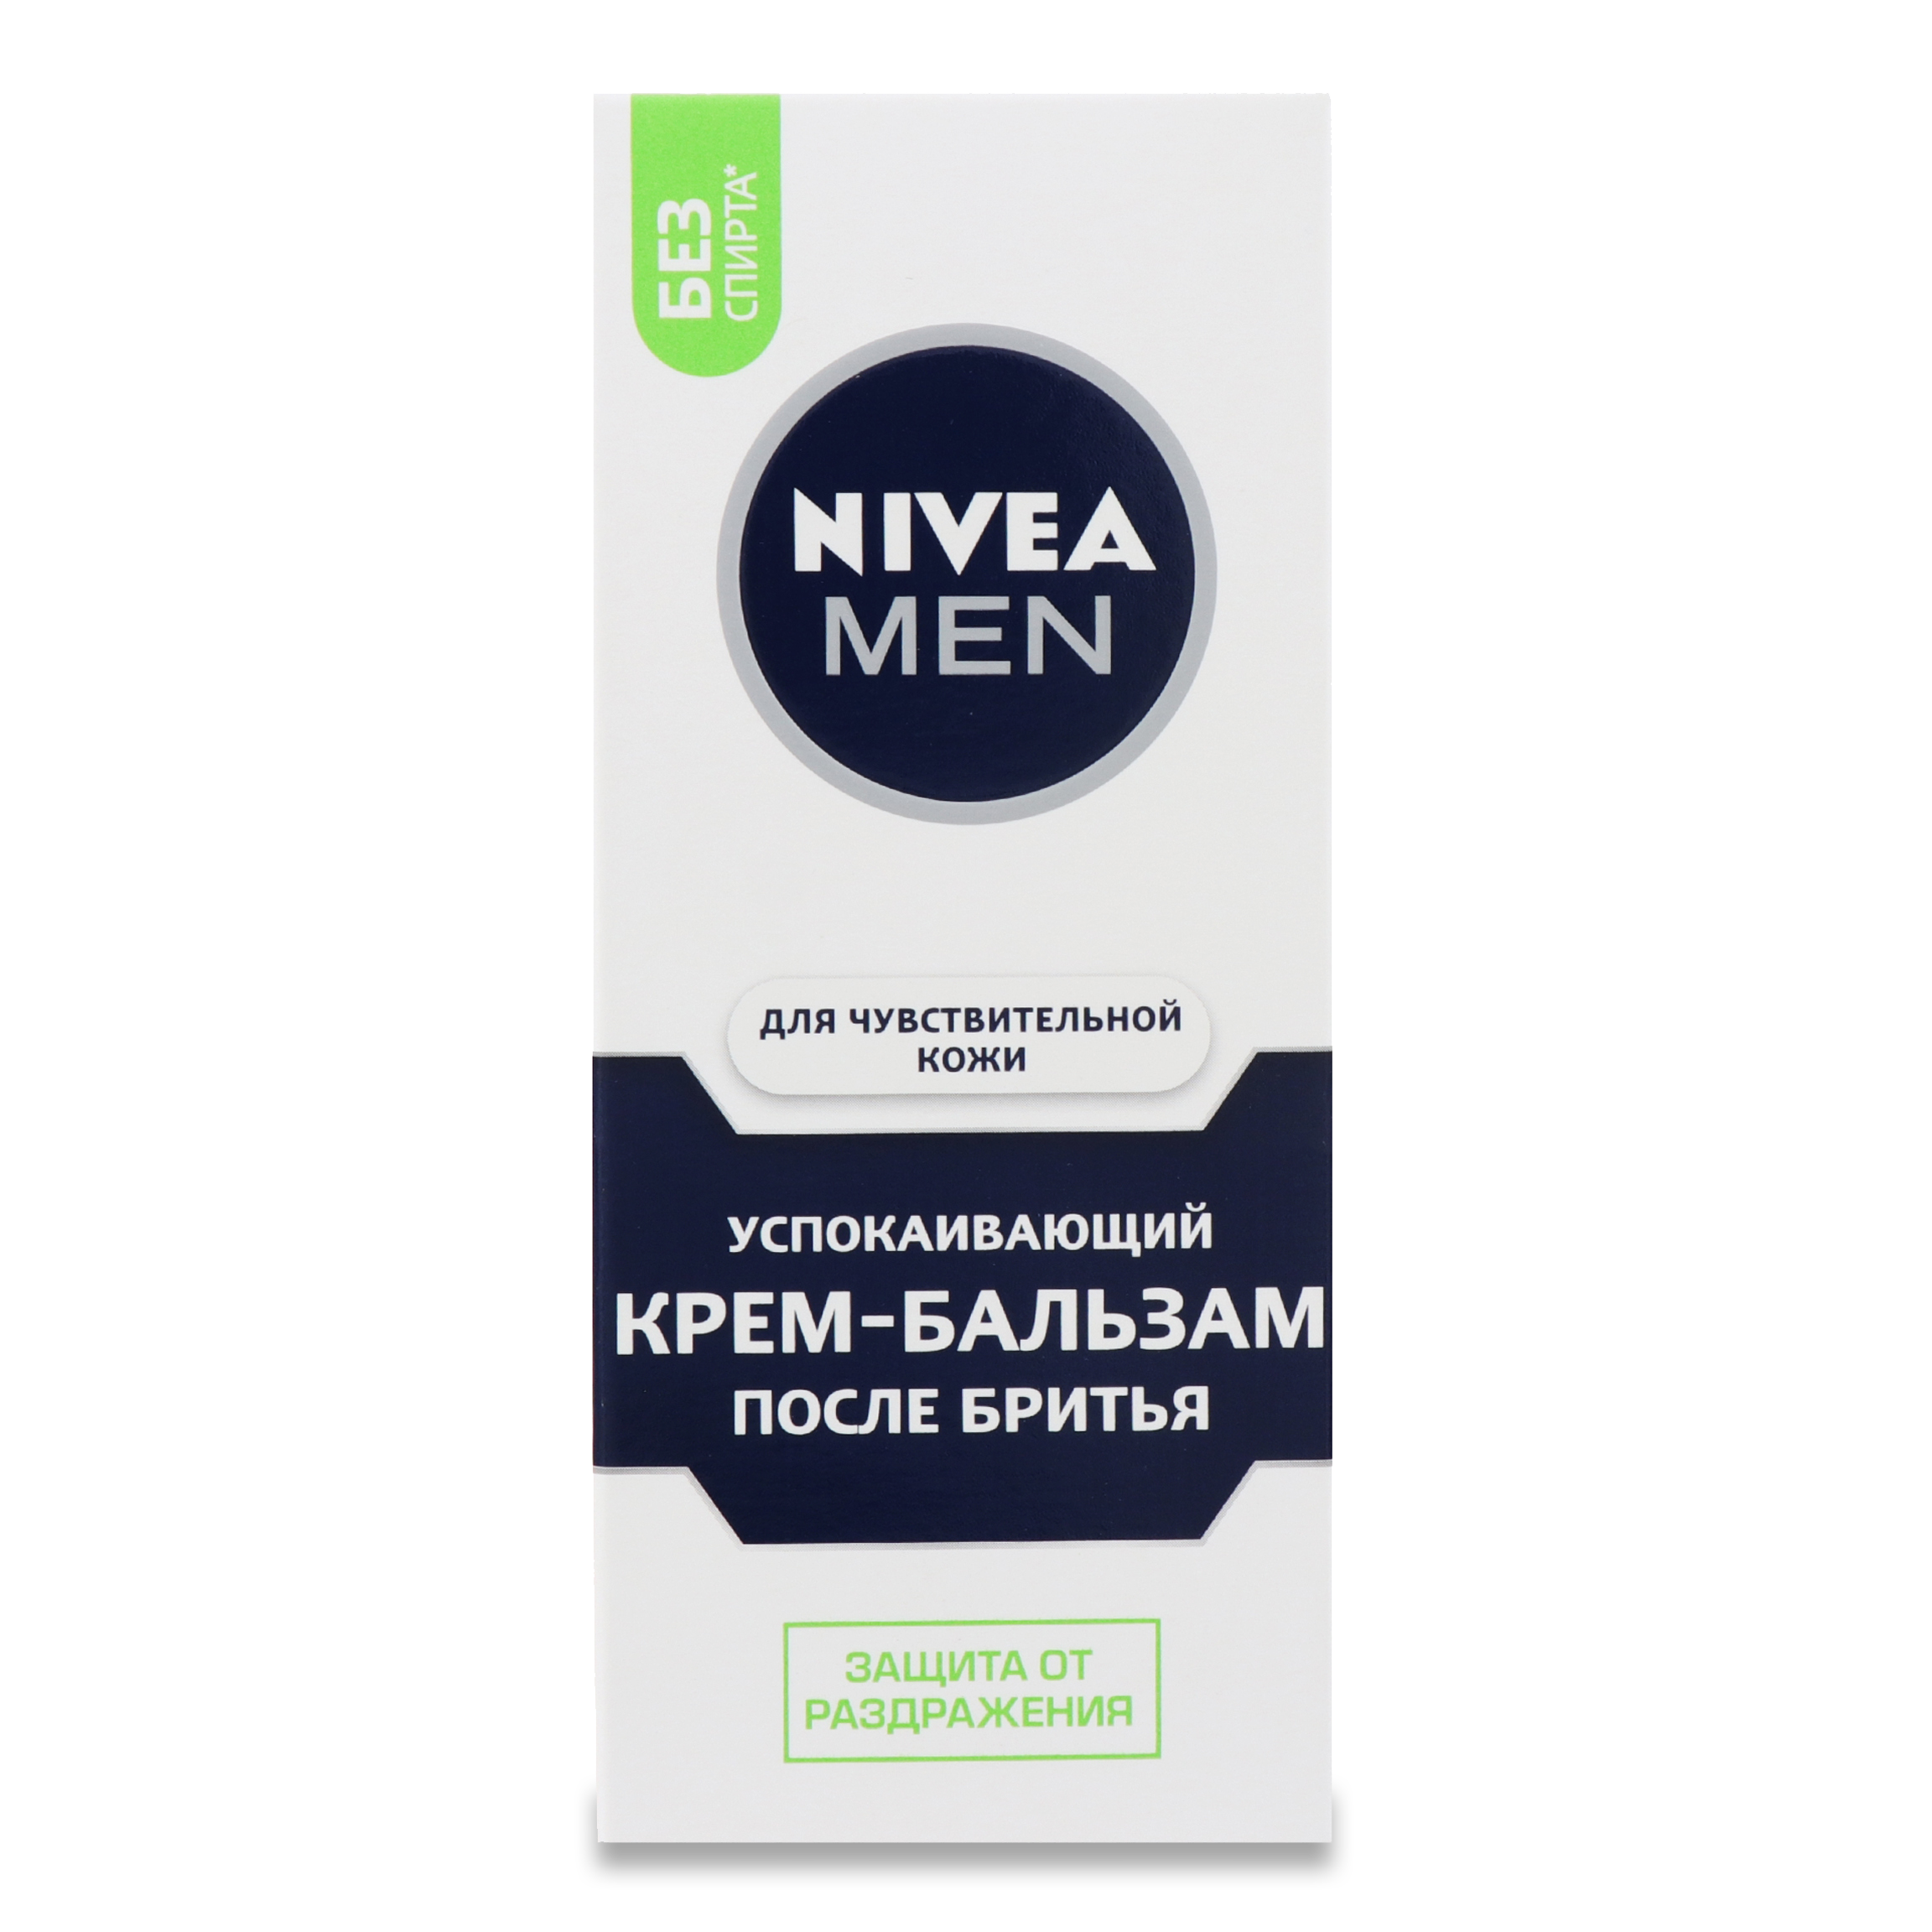 Nivea Men Soothing After Shave Cream Balm 75ml